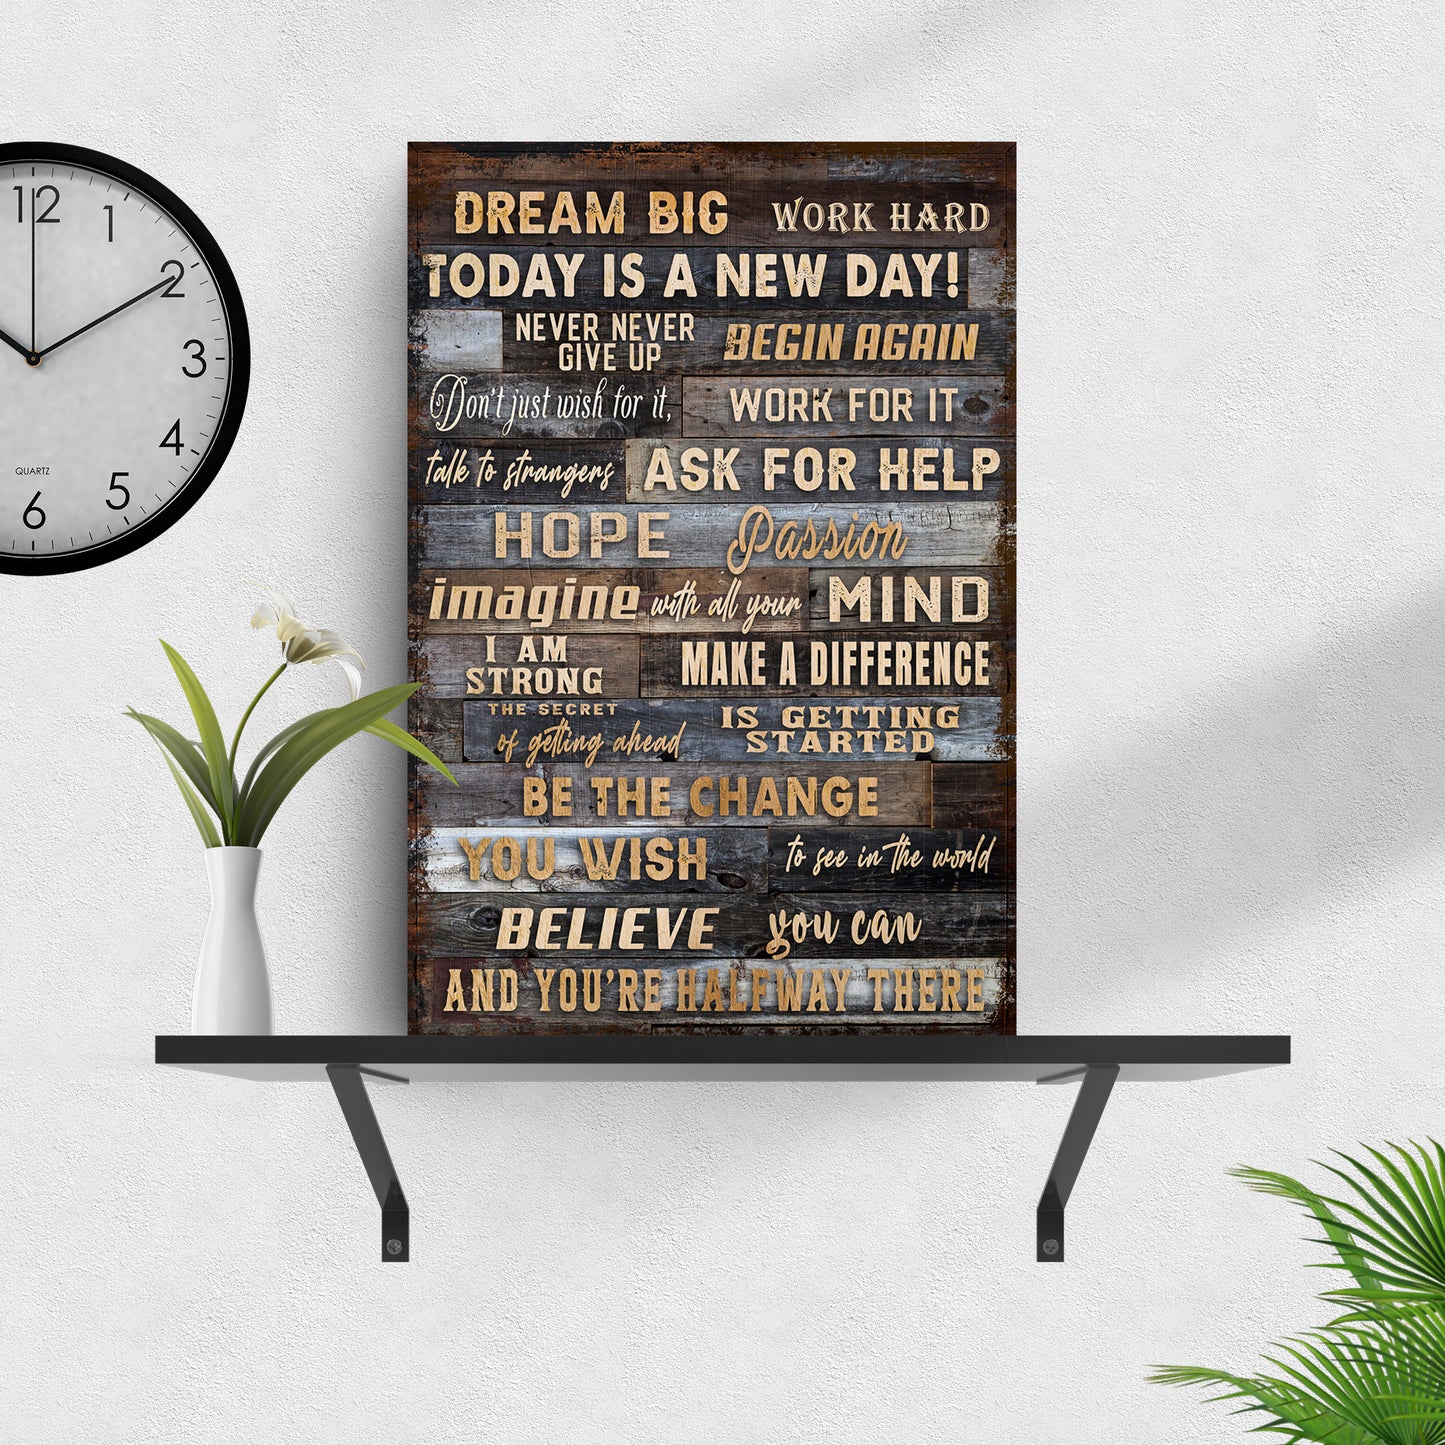 Dream Big Work Hard Motivation Sign - Image by Tailored Canvases